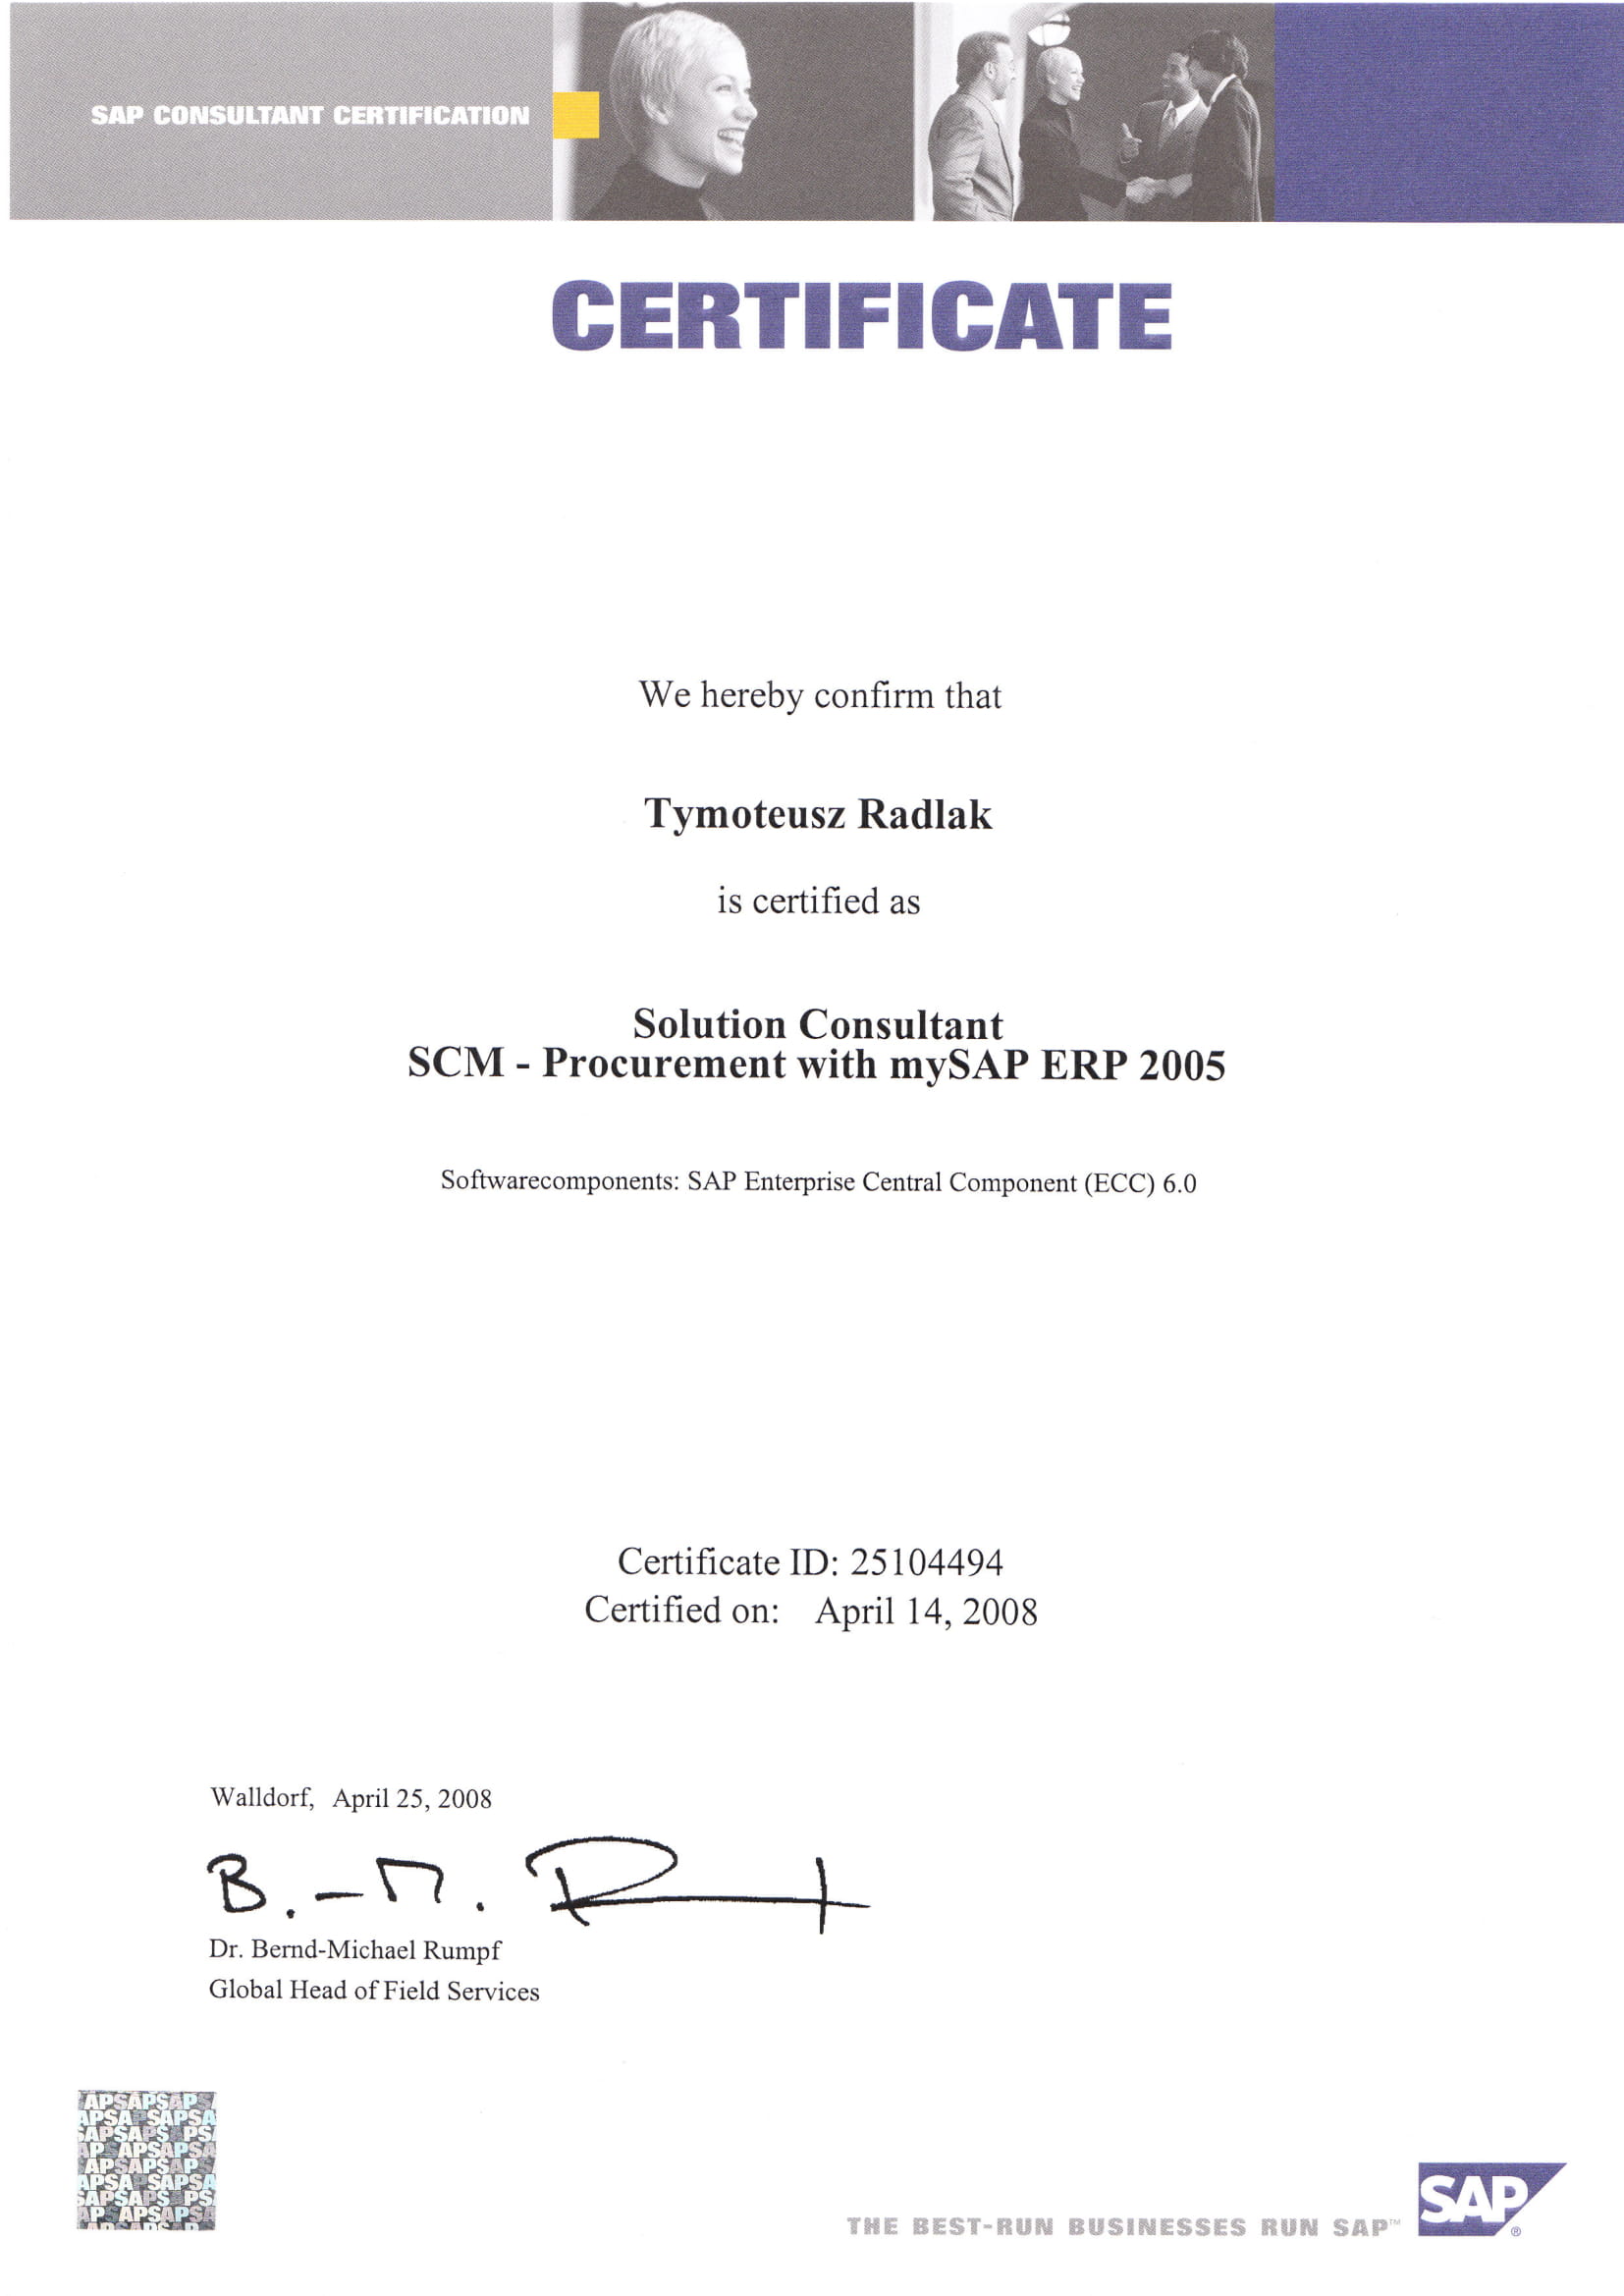 Certified - Solution Consultant SCM - Procurement with my SAP ERP